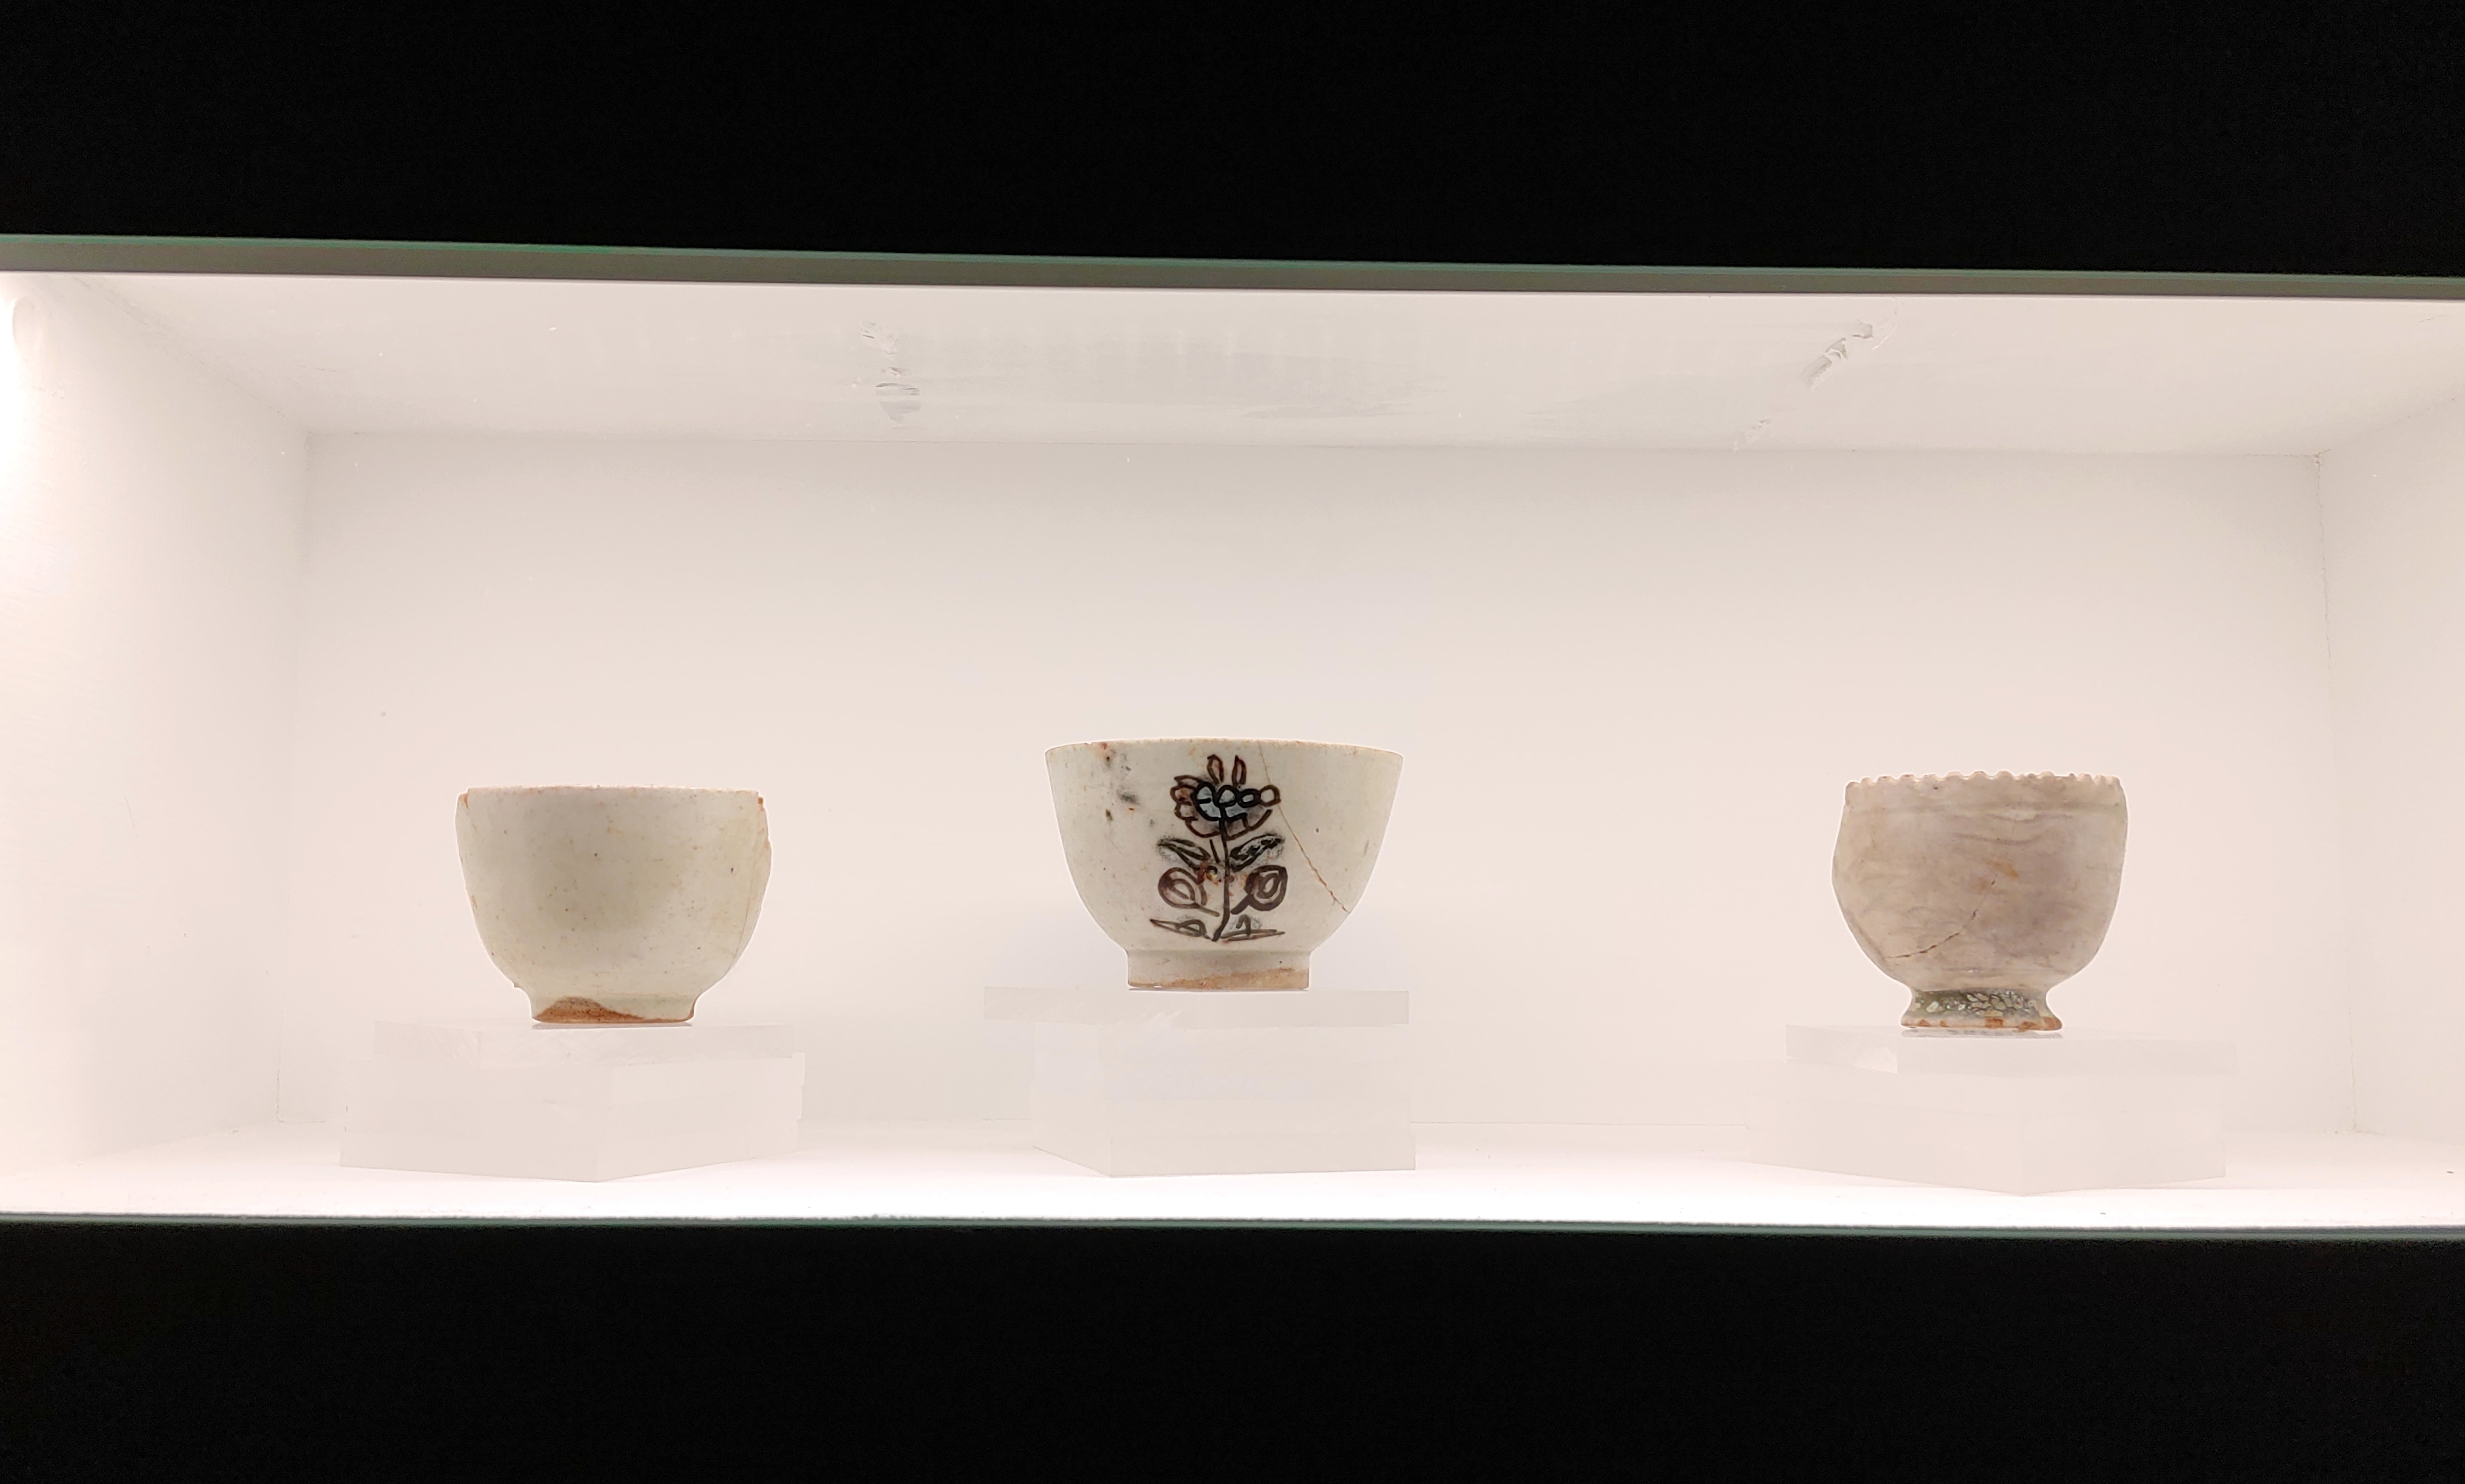 Excavated Ottoman coffee cups from Khirbet Hamsa